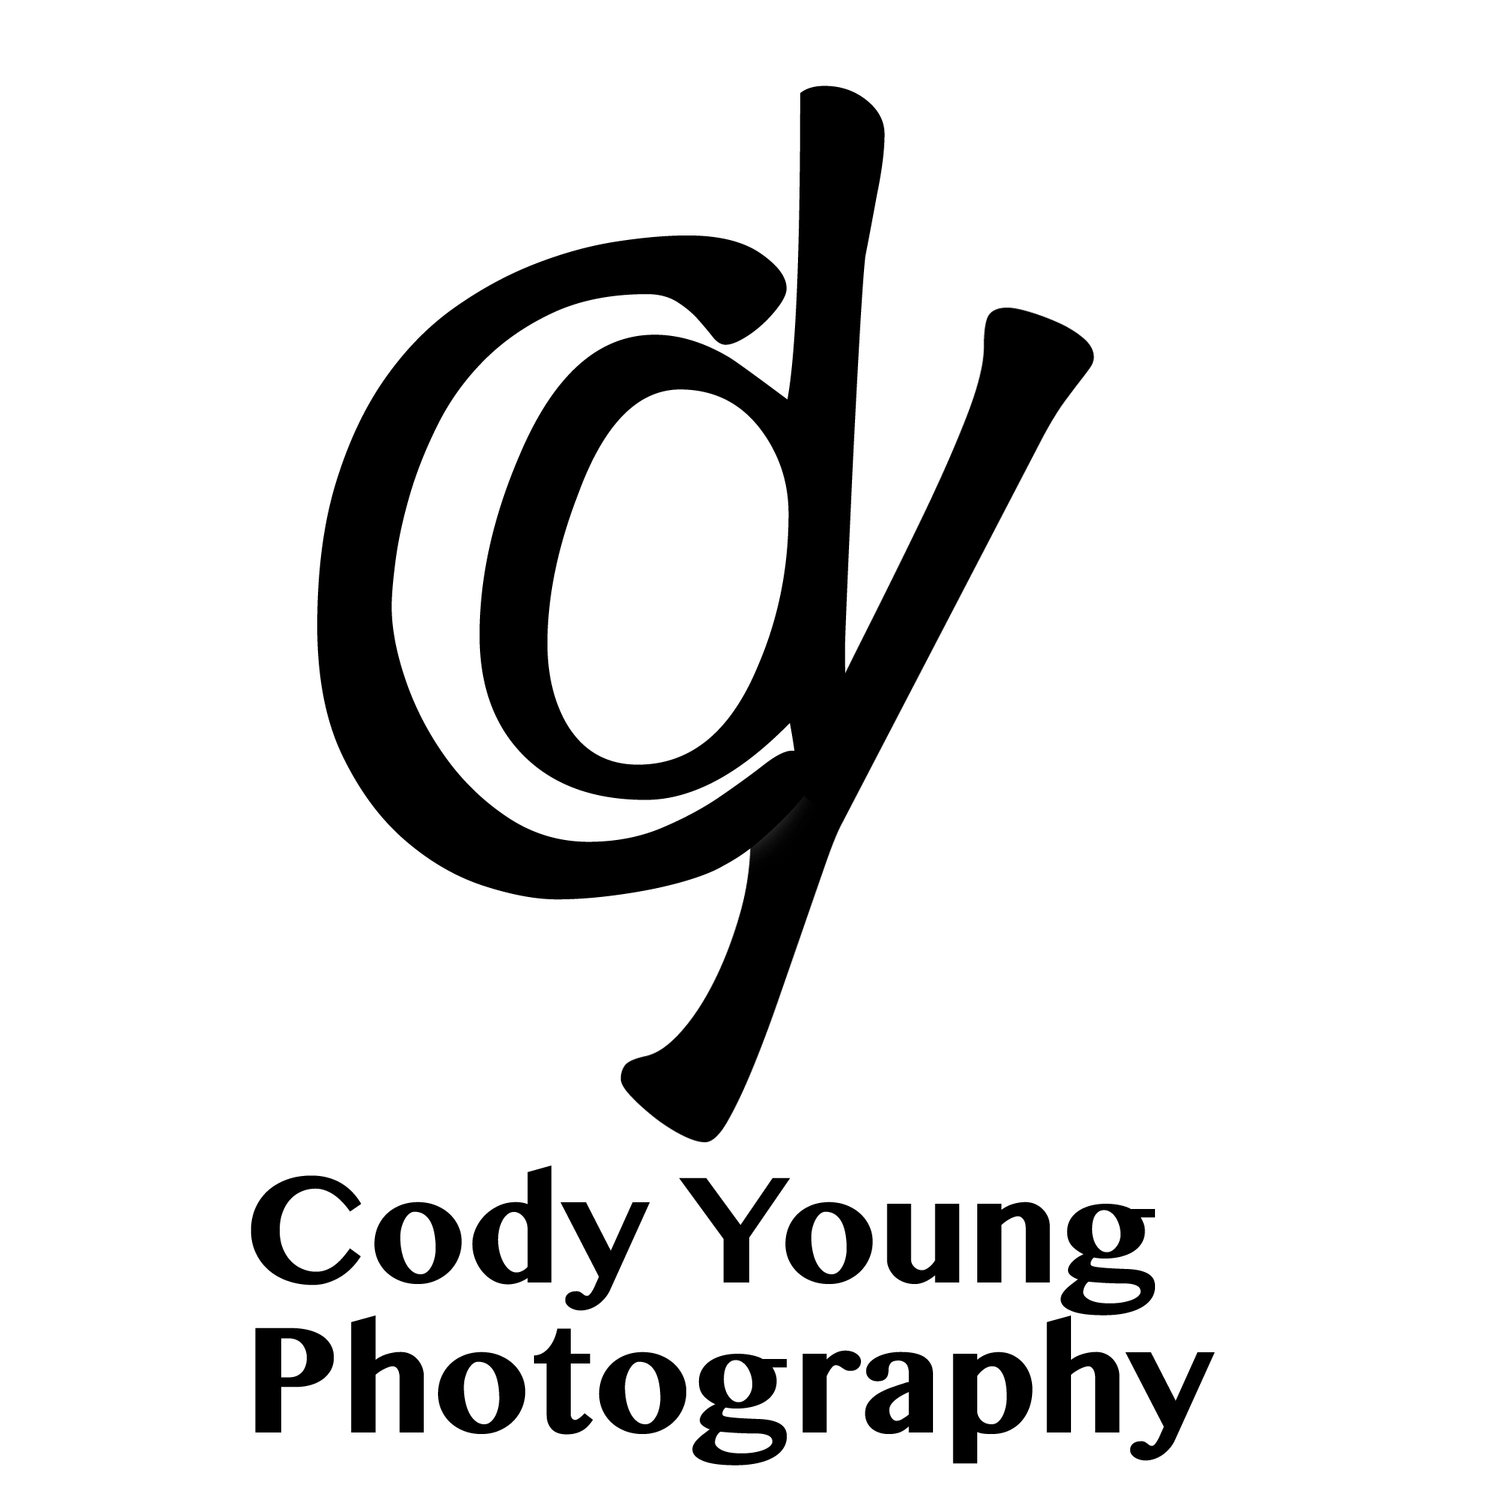 Cody Young Photography